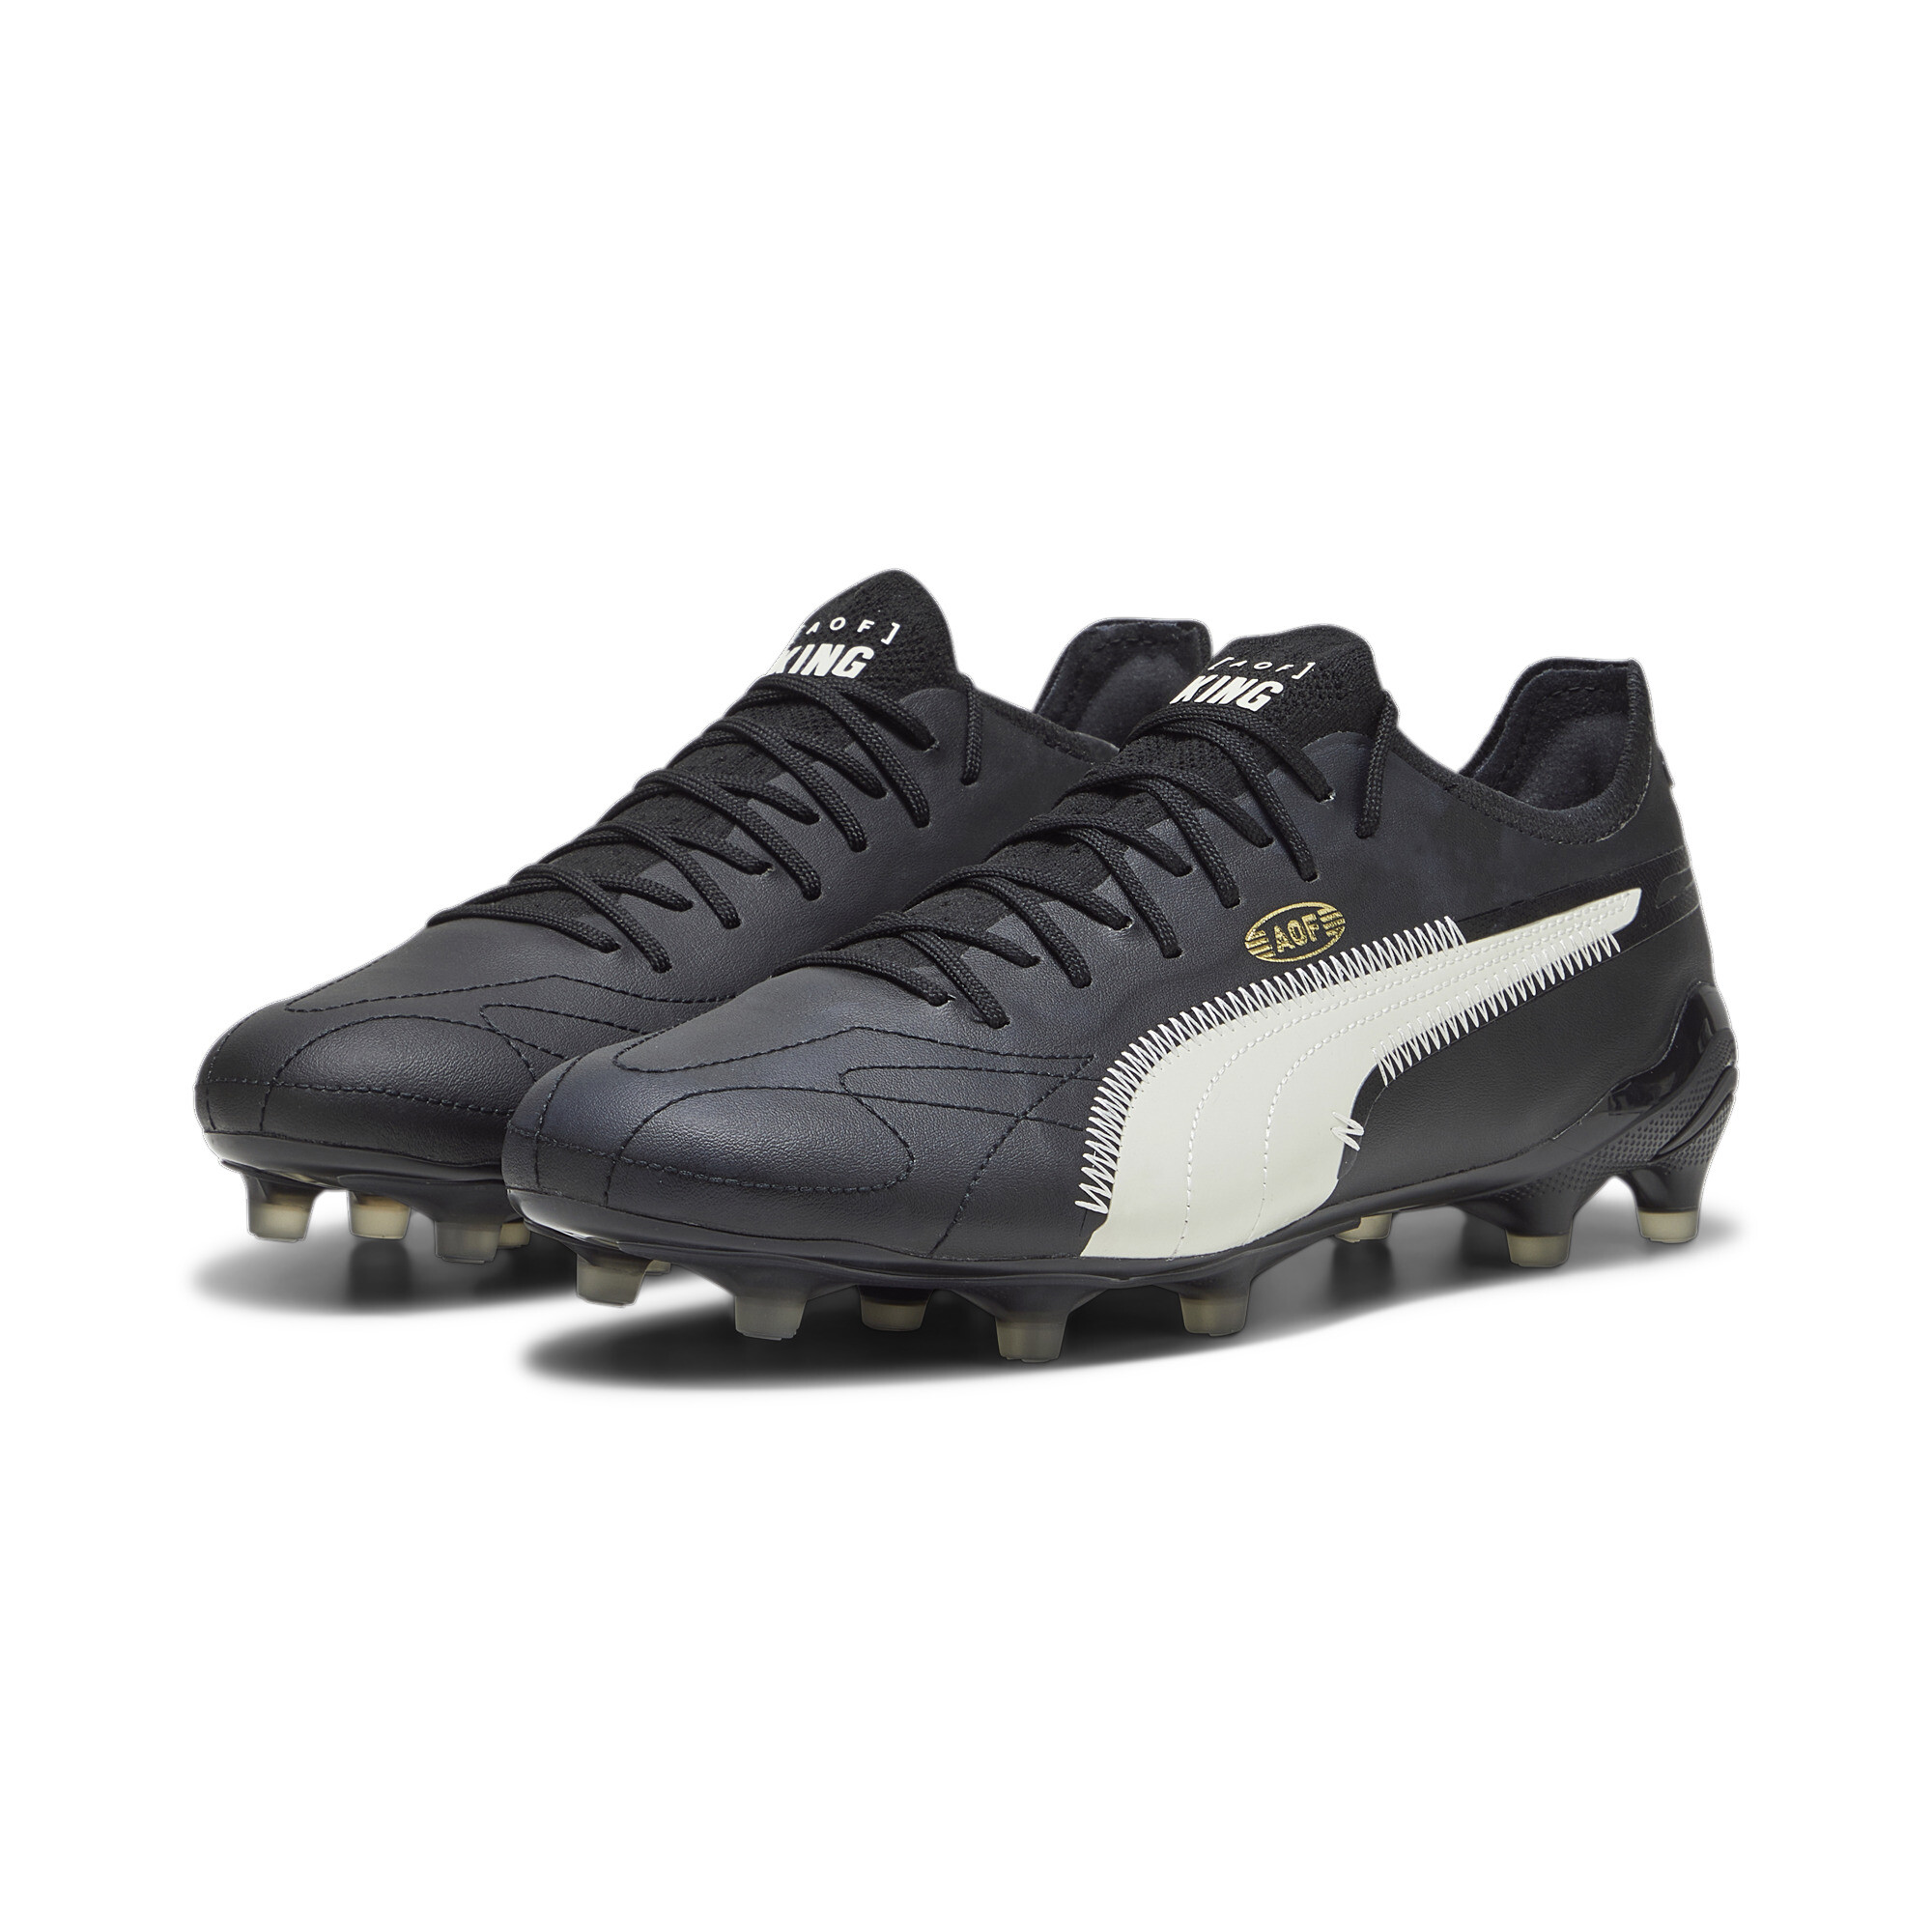 Men's PUMA KING ULTIMATE ART OF FOOTBALL FG/AG Football Boots In Black/Gold, Size EU 42.5